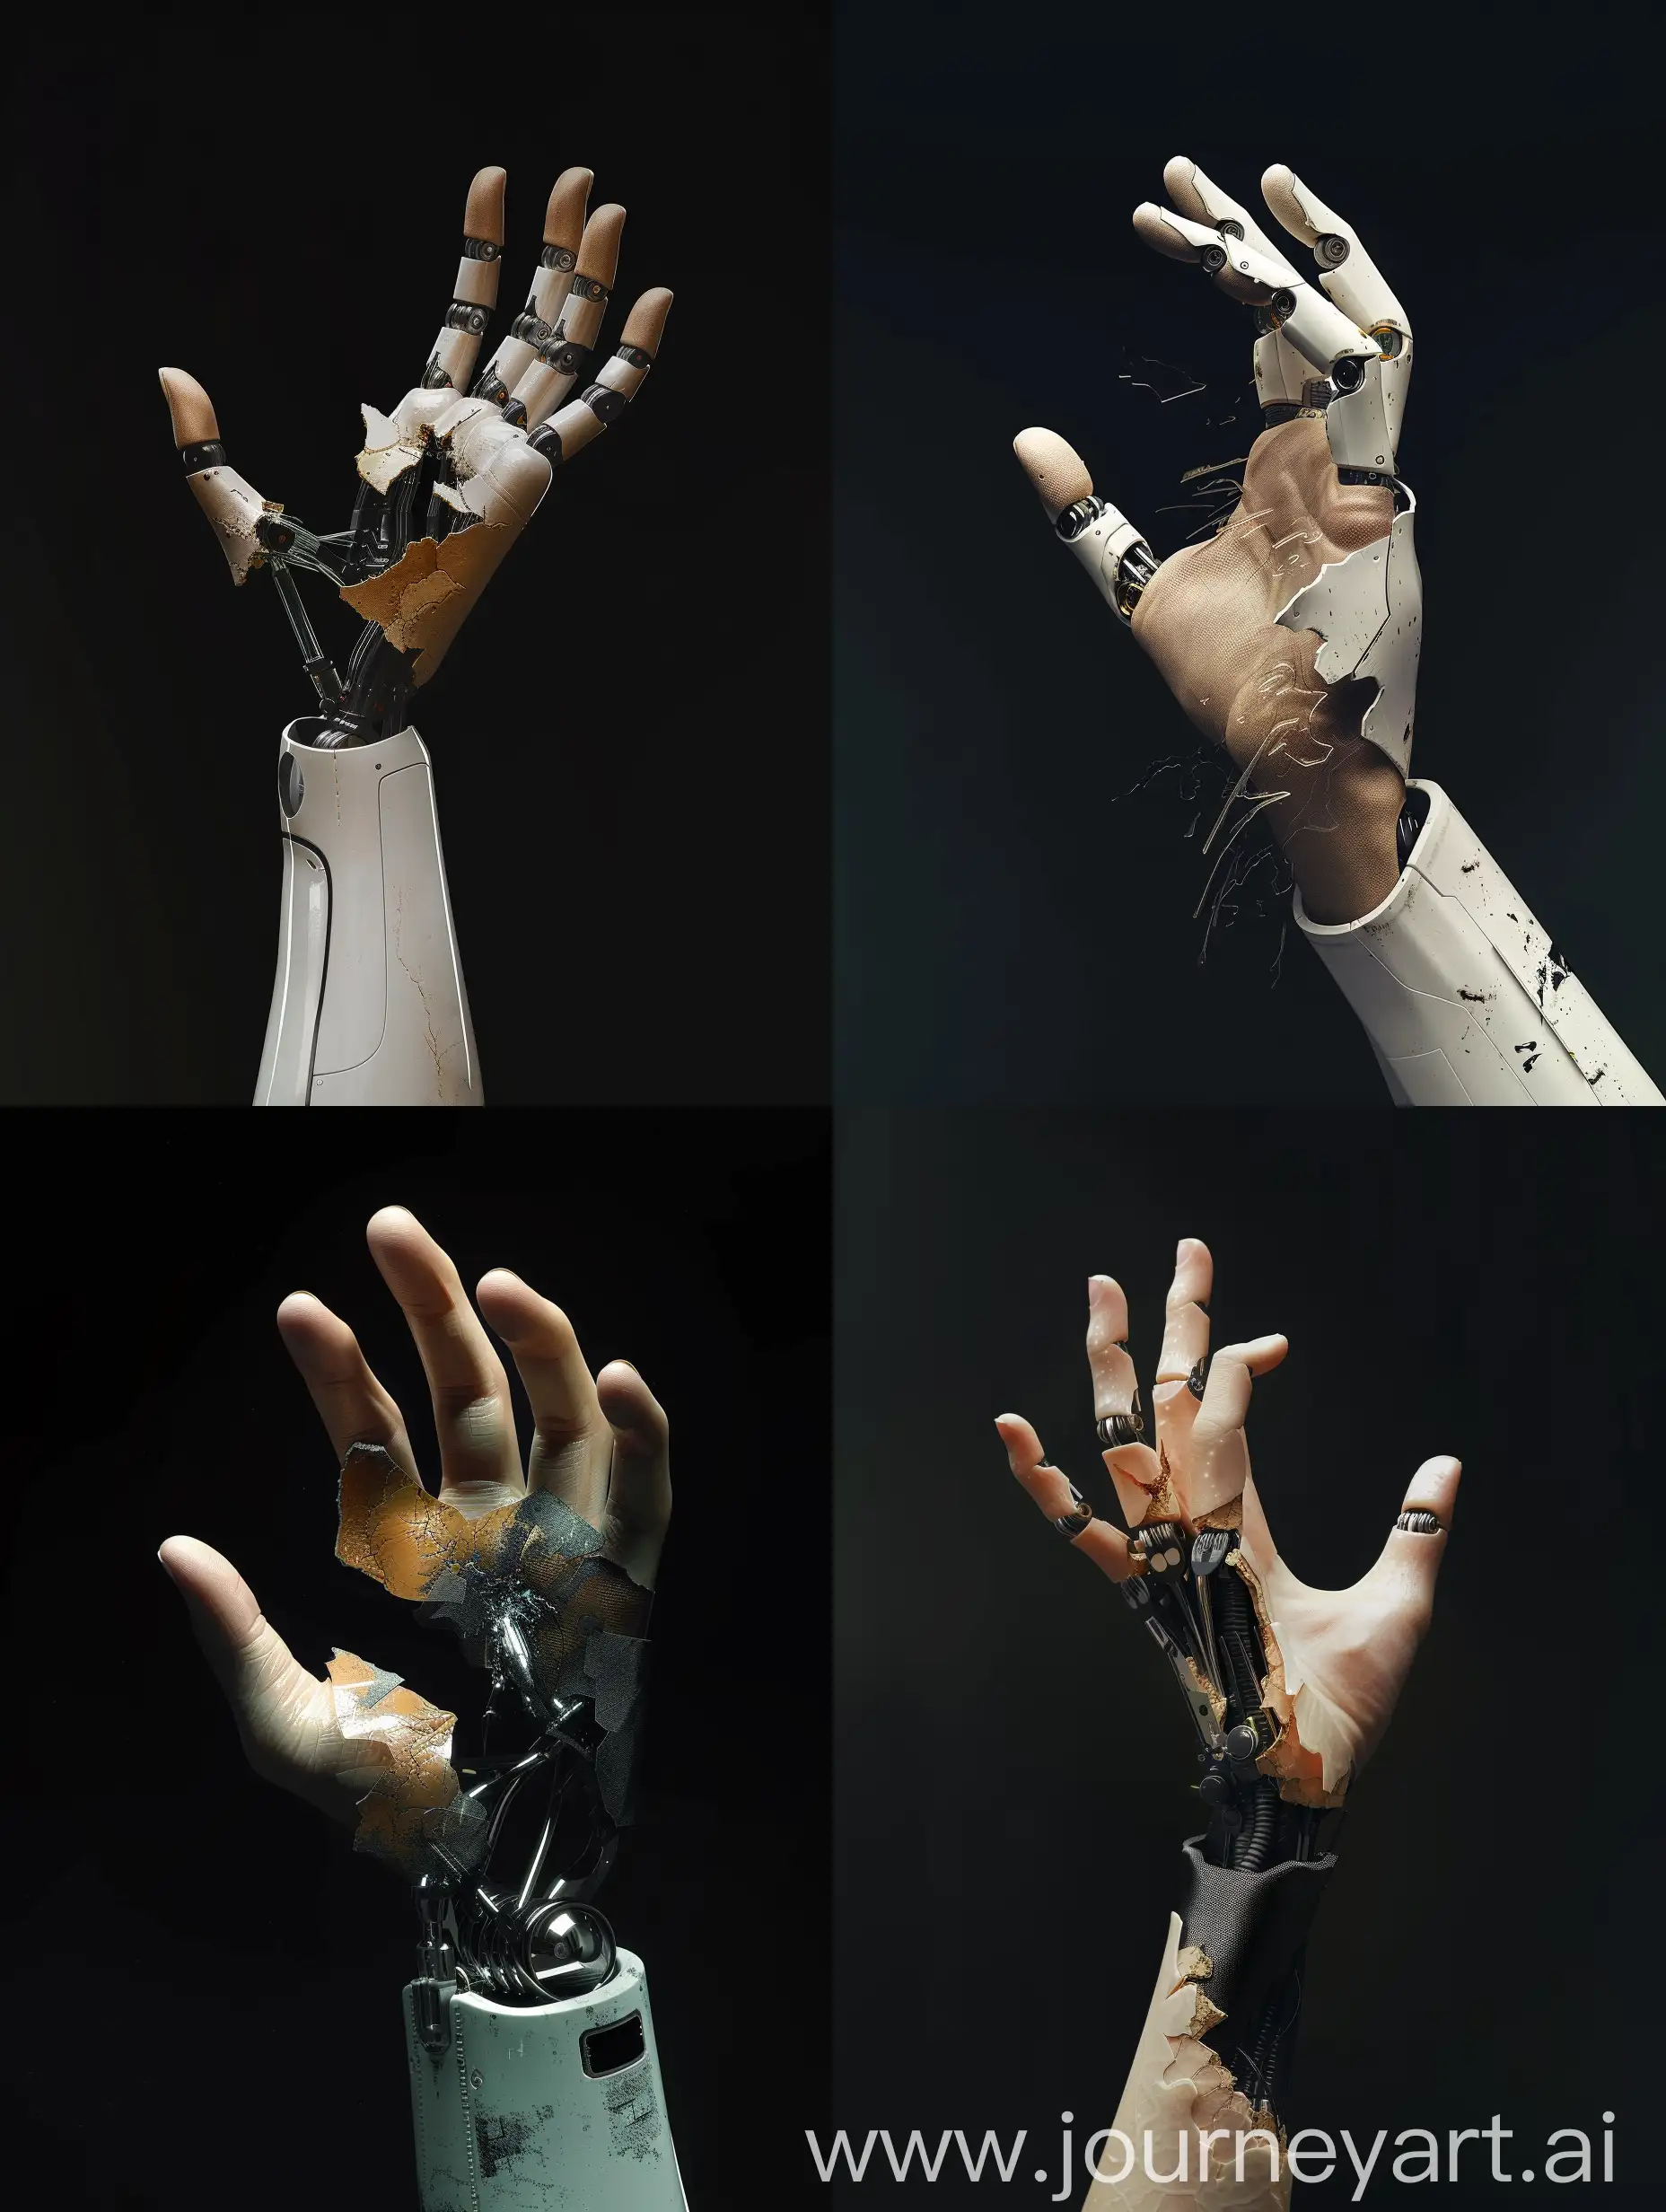 Transitioning-Robotic-Hand-Unveiling-Human-Touch-on-Black-Background